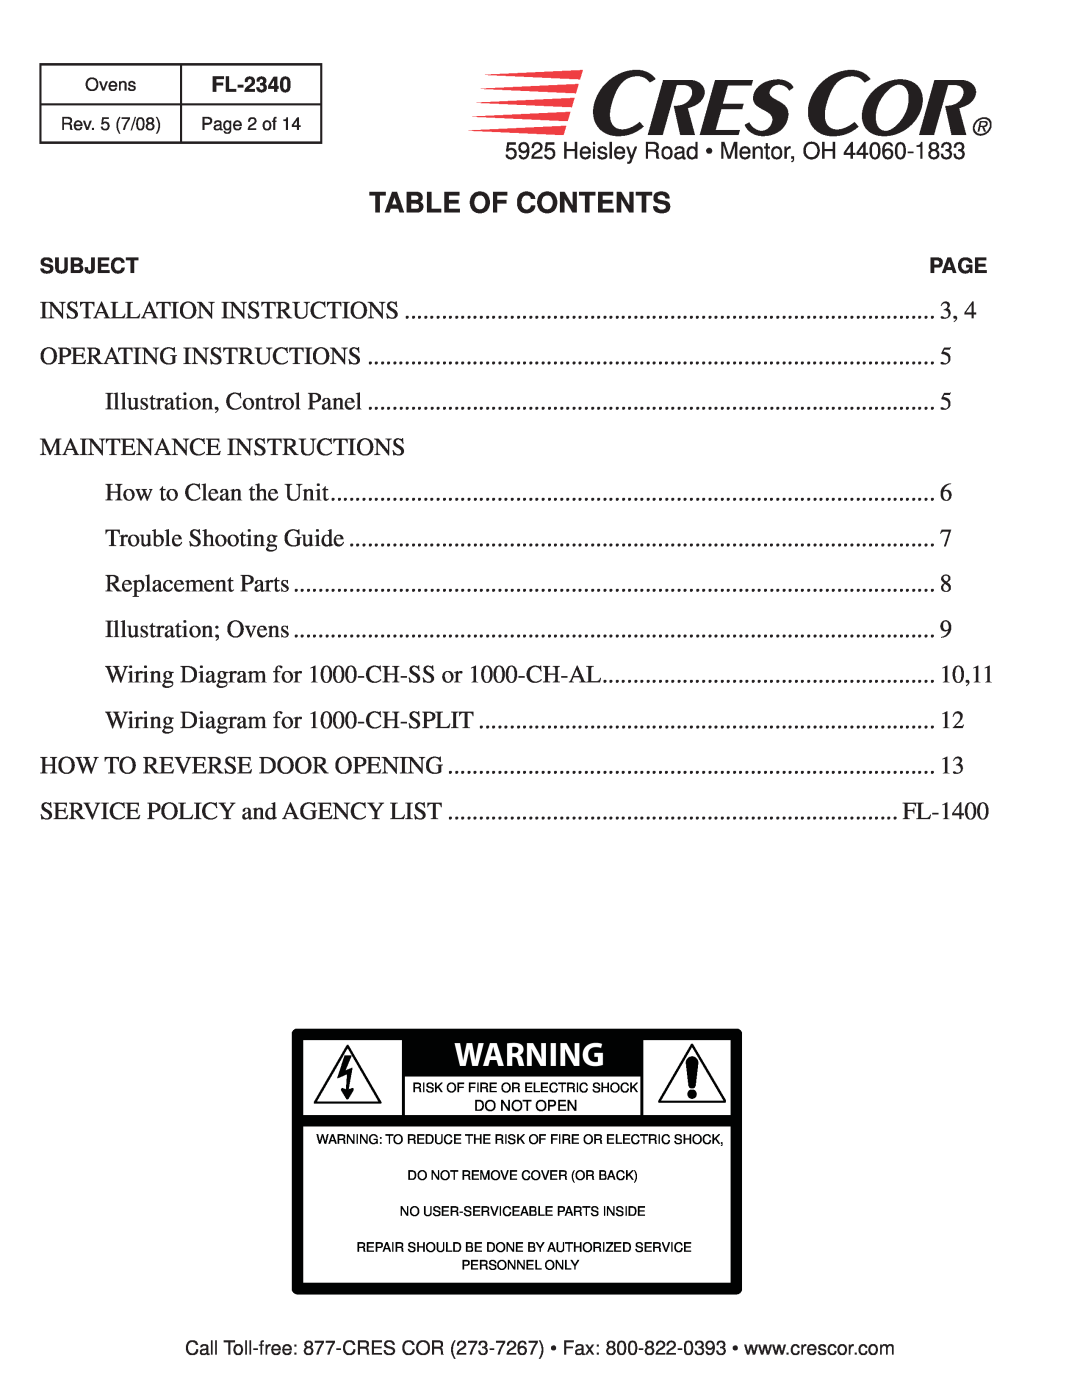 Cres Cor 1000-CH Series Table Of Contents, Subject, Page, Maintenance Instructions, 10,11, FL-1400, Operating Instructions 